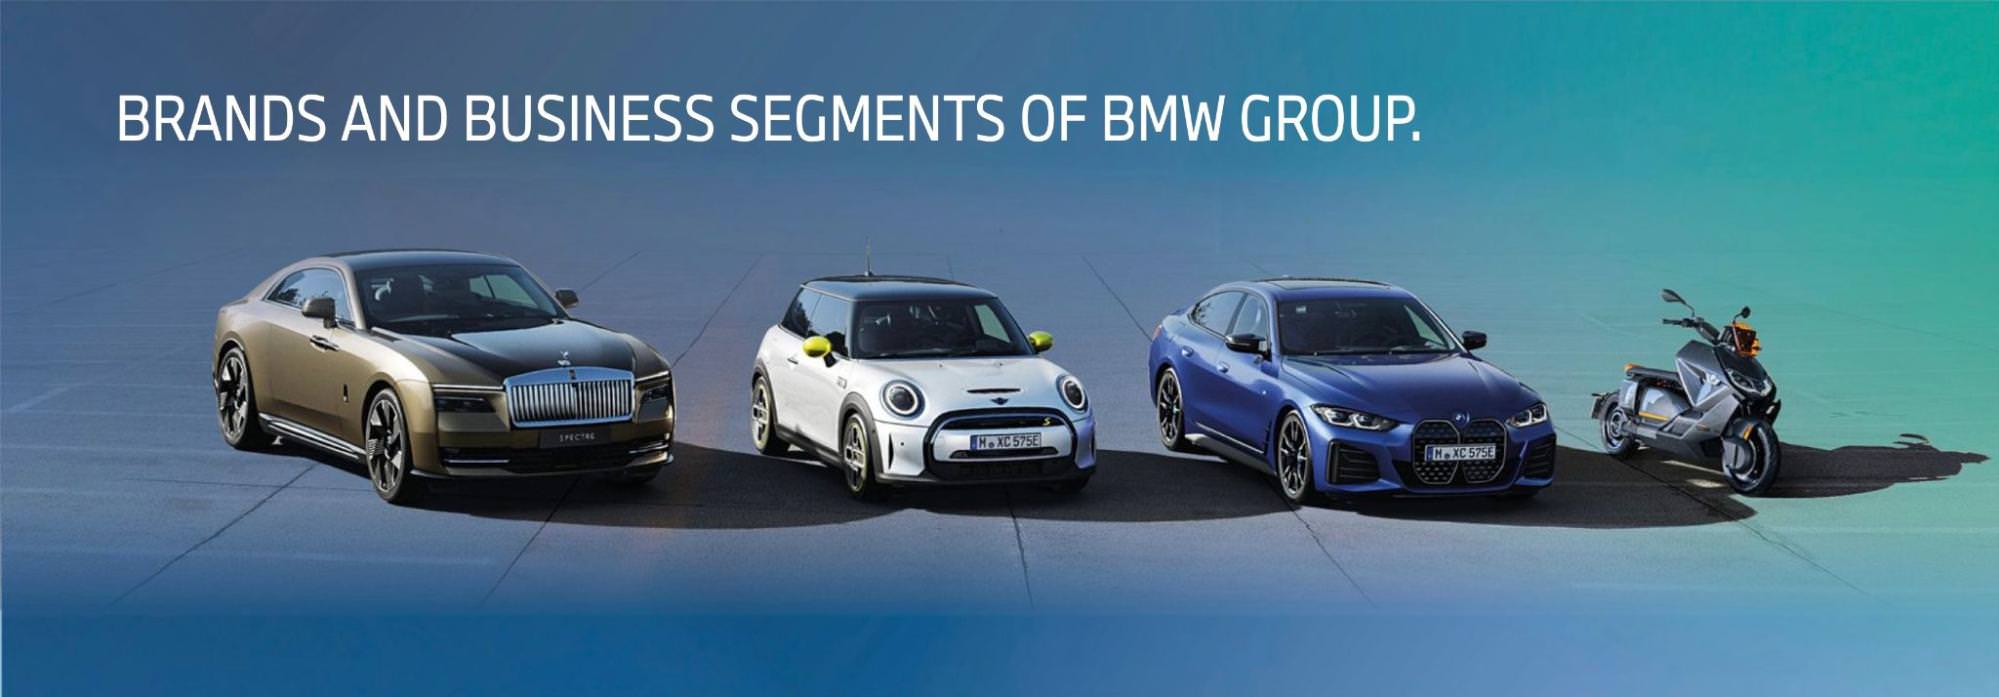 Infographic showing the brands and business segments of BMW Group.